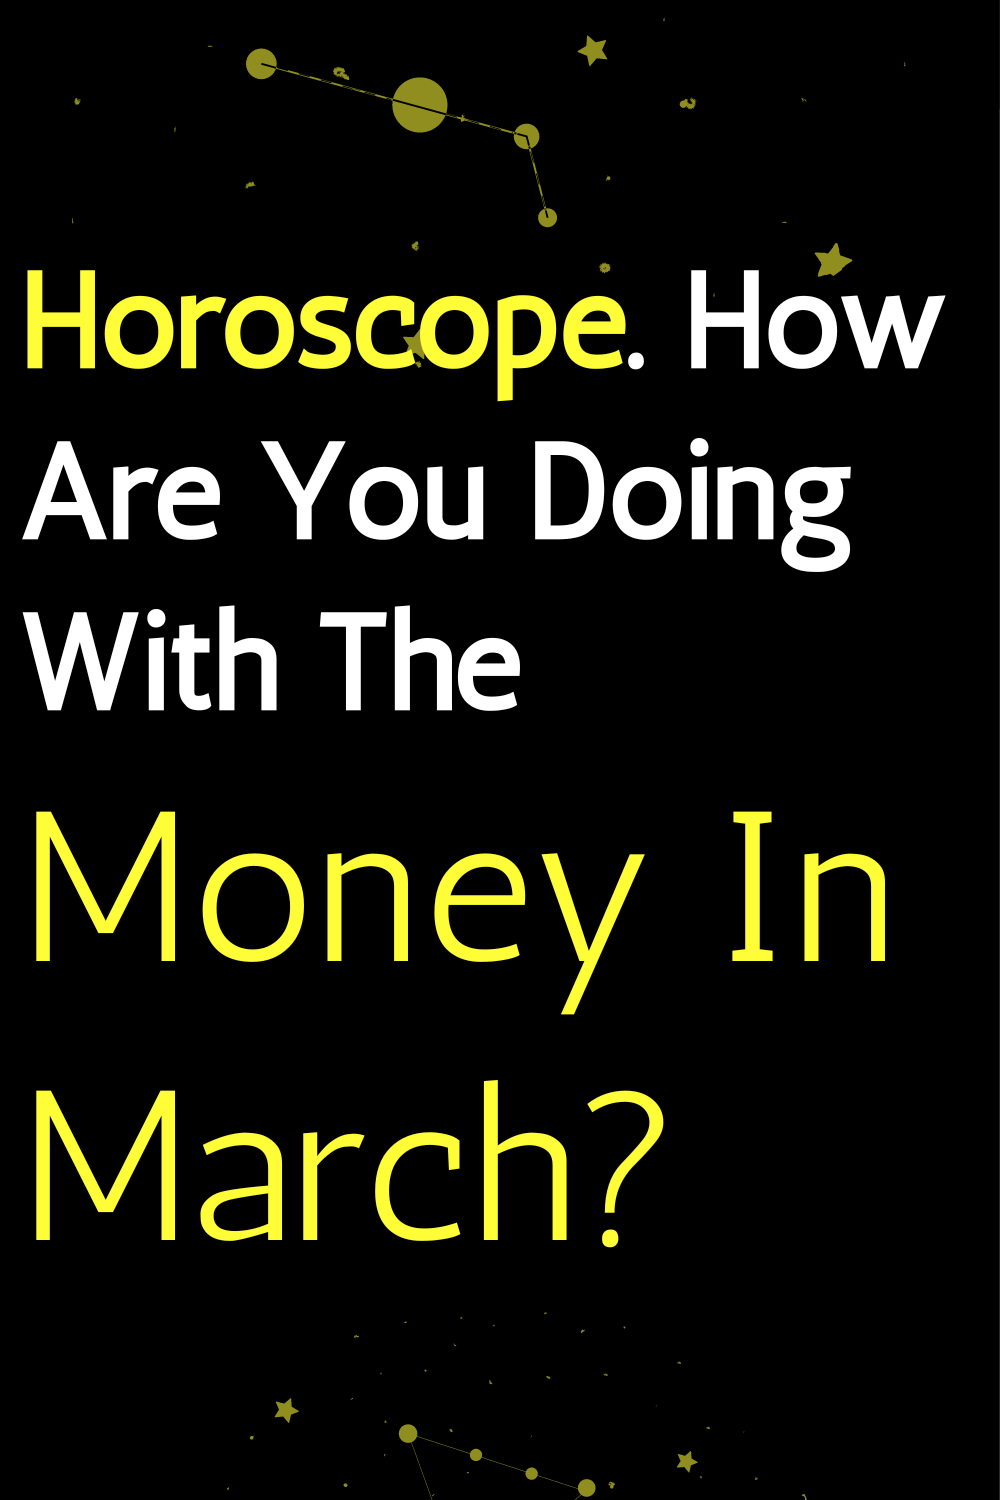 Horoscope. How Are You Doing With The Money In March?